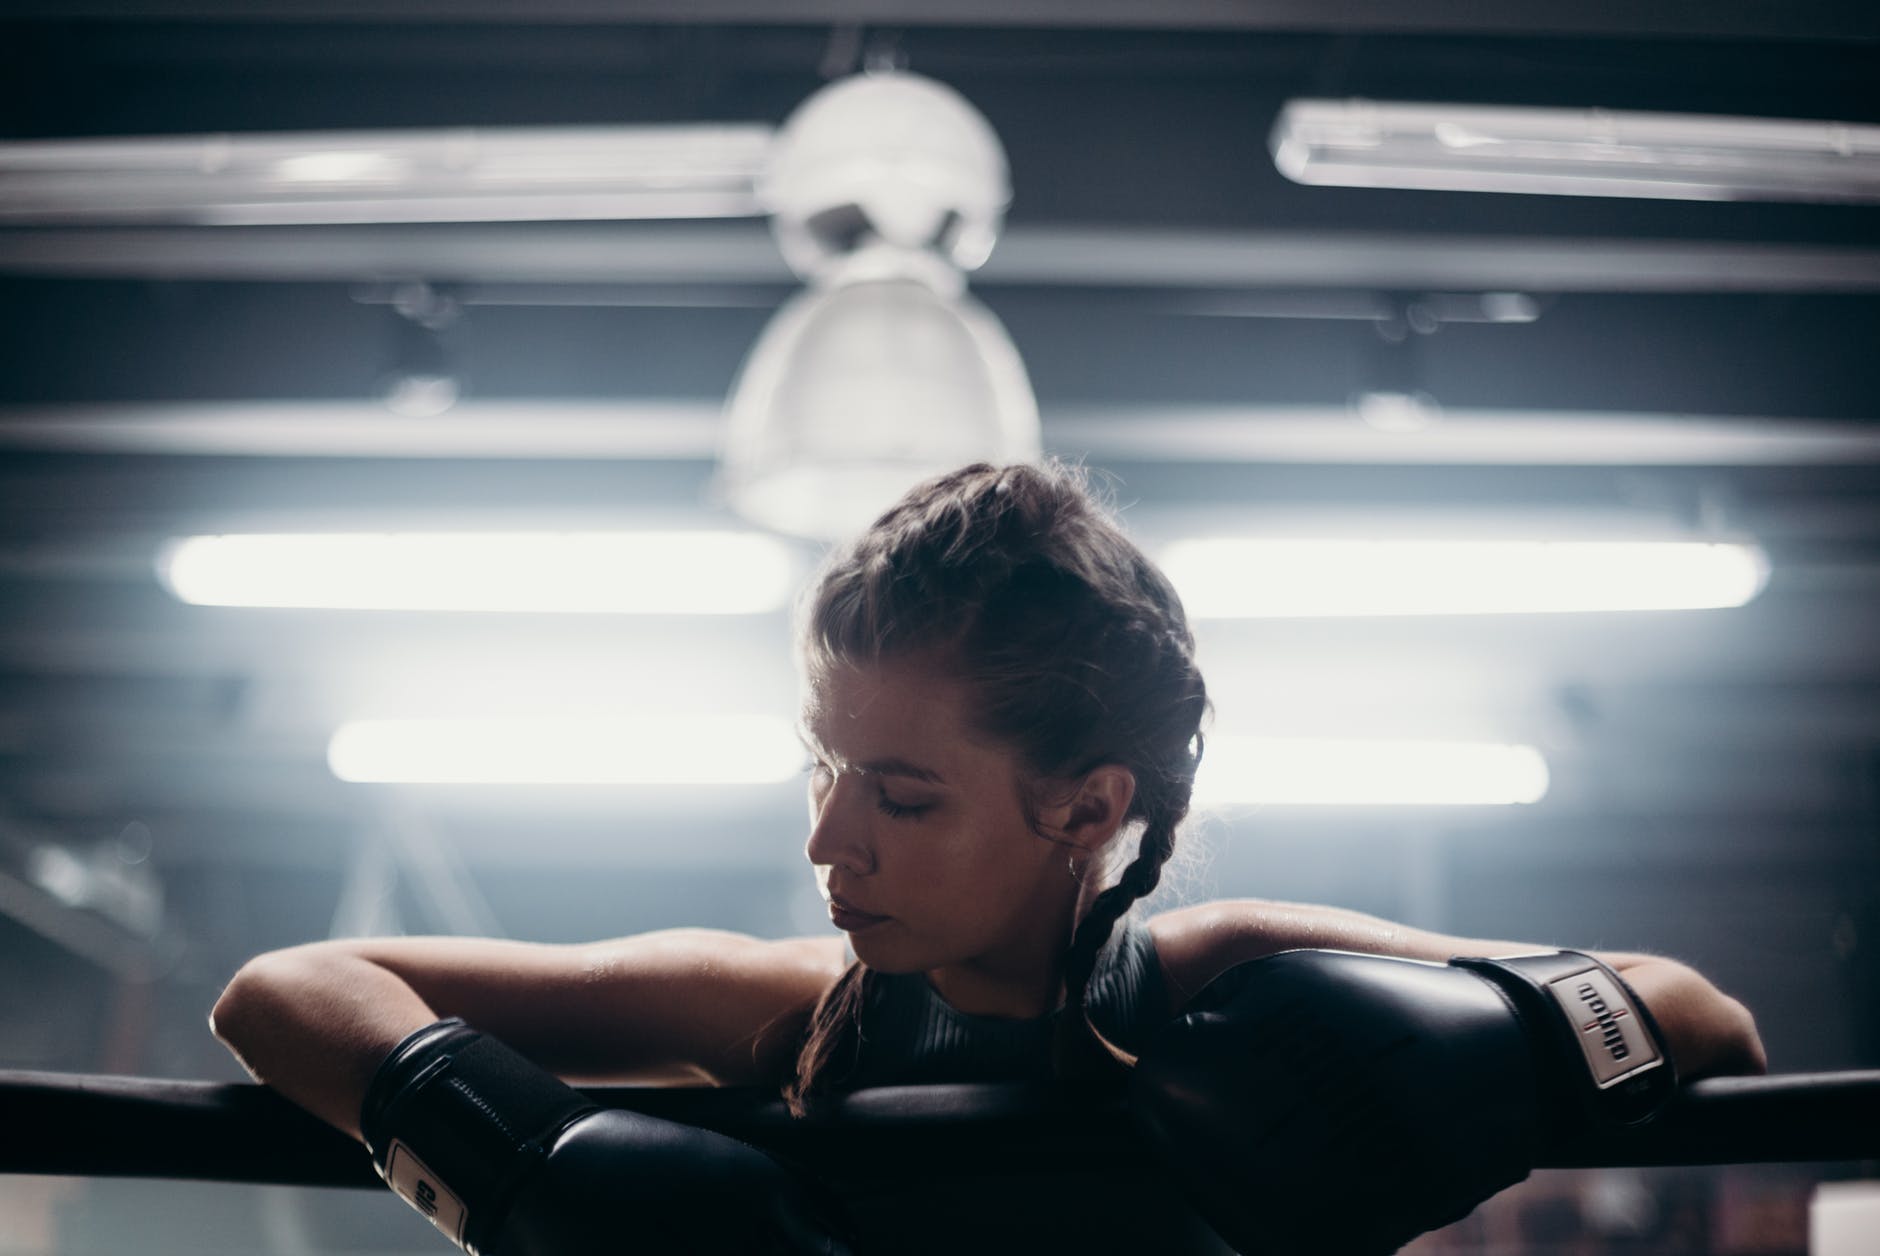 Boxing girl in the ring